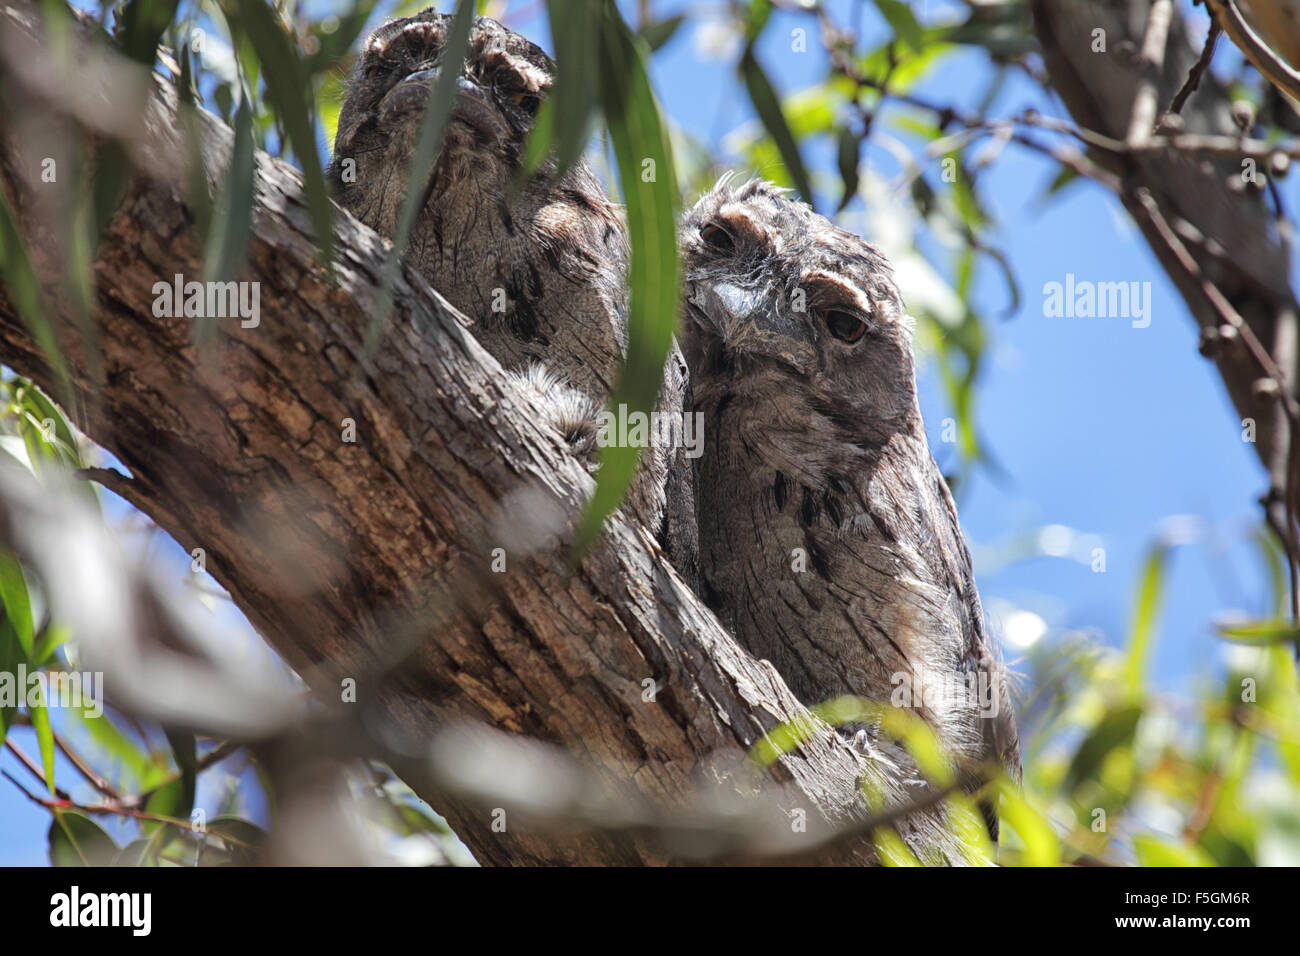 Two Tawny Frogmouths (Podargus strigoides) well camouflaged sitting on a tree branch on Raymond Island in Lake King, Victoria, A Stock Photo